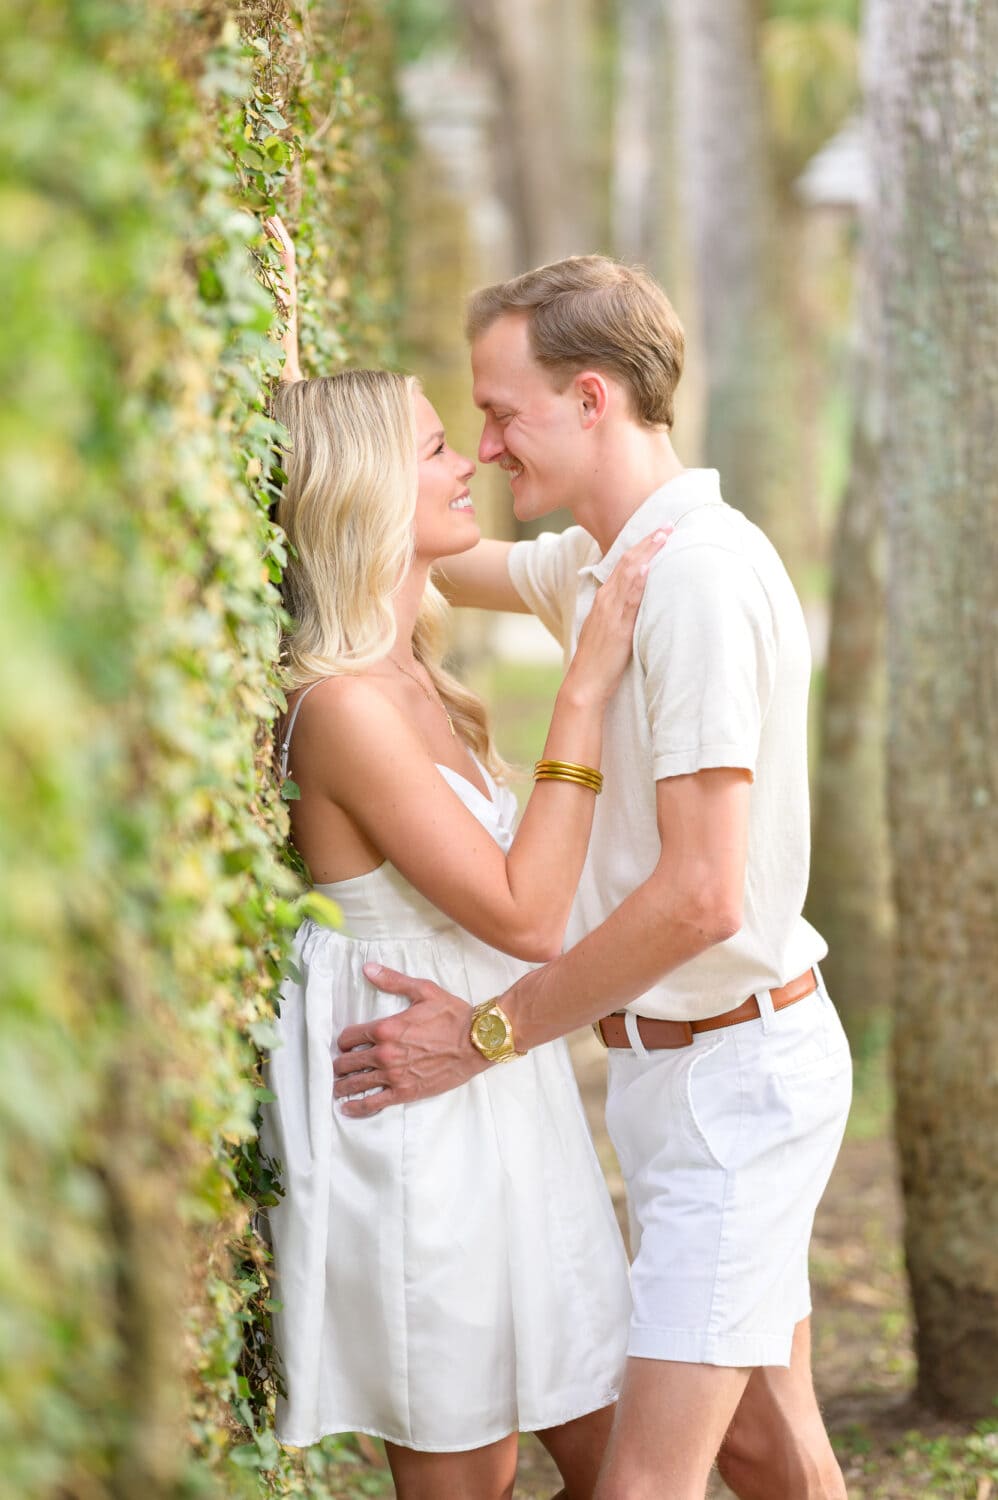 Romance by the ivy wall - Huntington Beach State Park